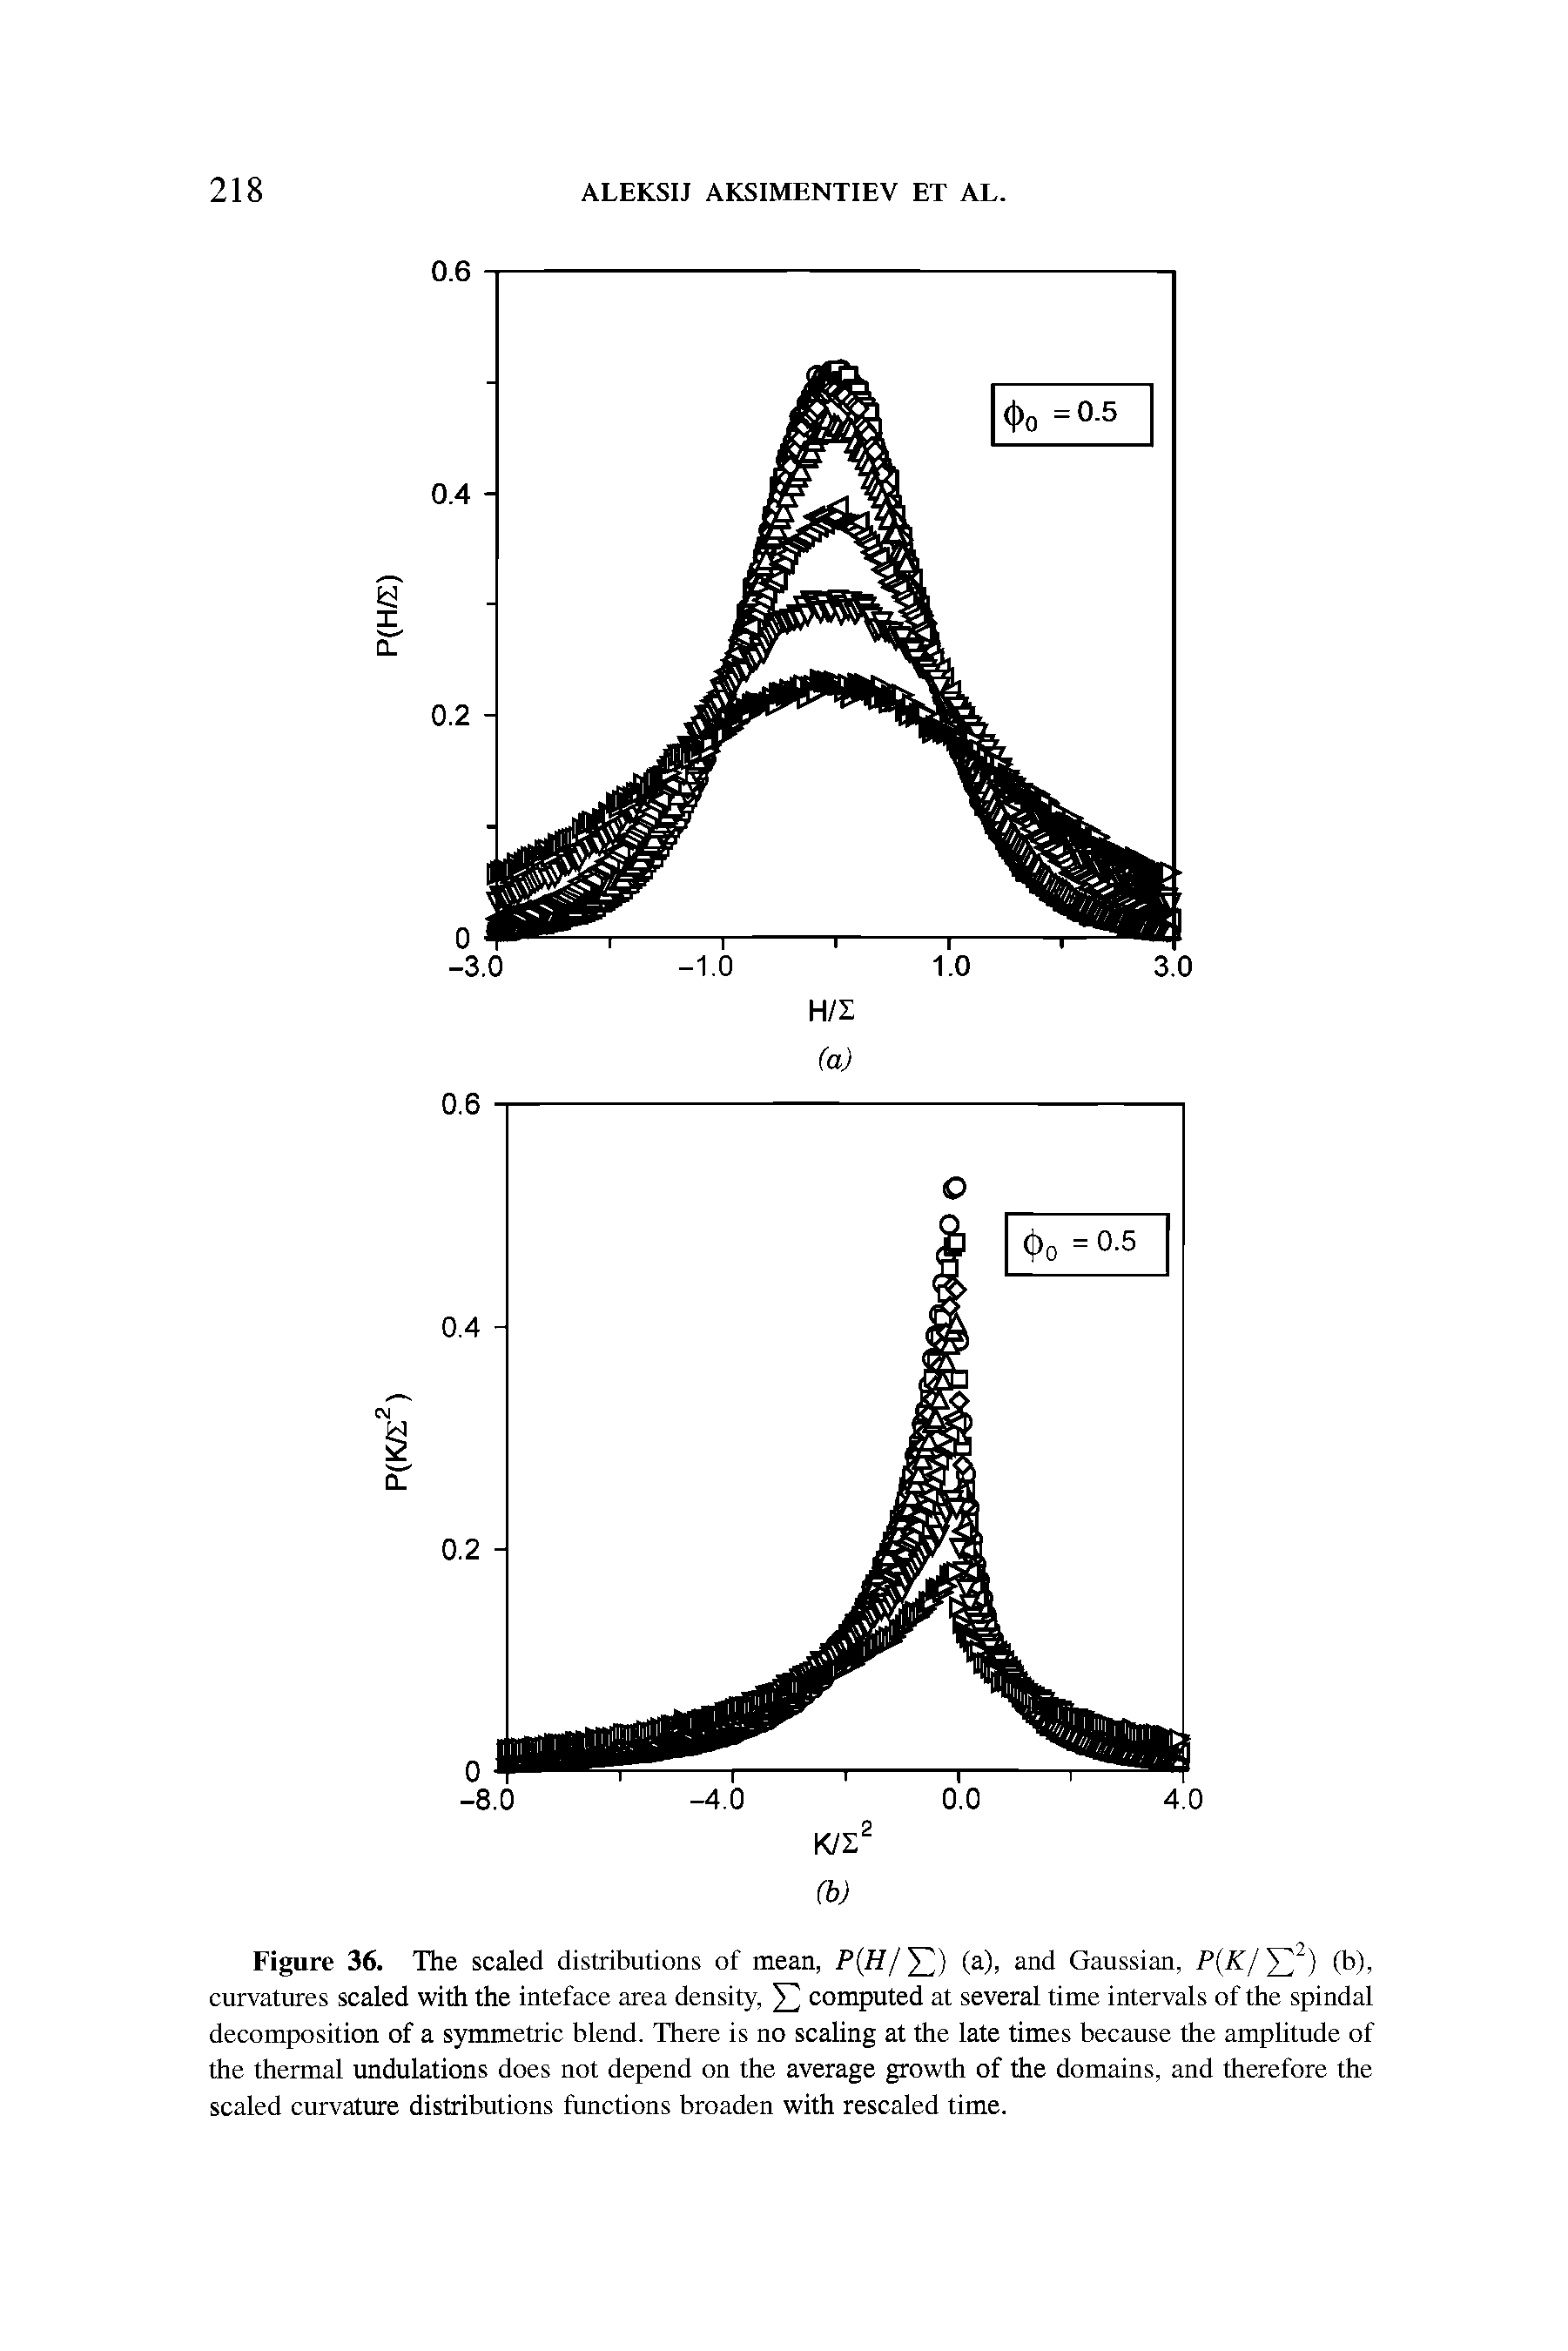 Figure 36. The scaled distributions of mean, P(H/Y ) (a), and Gaussian, P(K/Y]2) (b), curvatures scaled with the inteface area density, computed at several time intervals of the spindal decomposition of a symmetric blend. There is no scaling at the late times because the amplitude of the thermal undulations does not depend on the average growth of the domains, and therefore the scaled curvature distributions functions broaden with rescaled time.